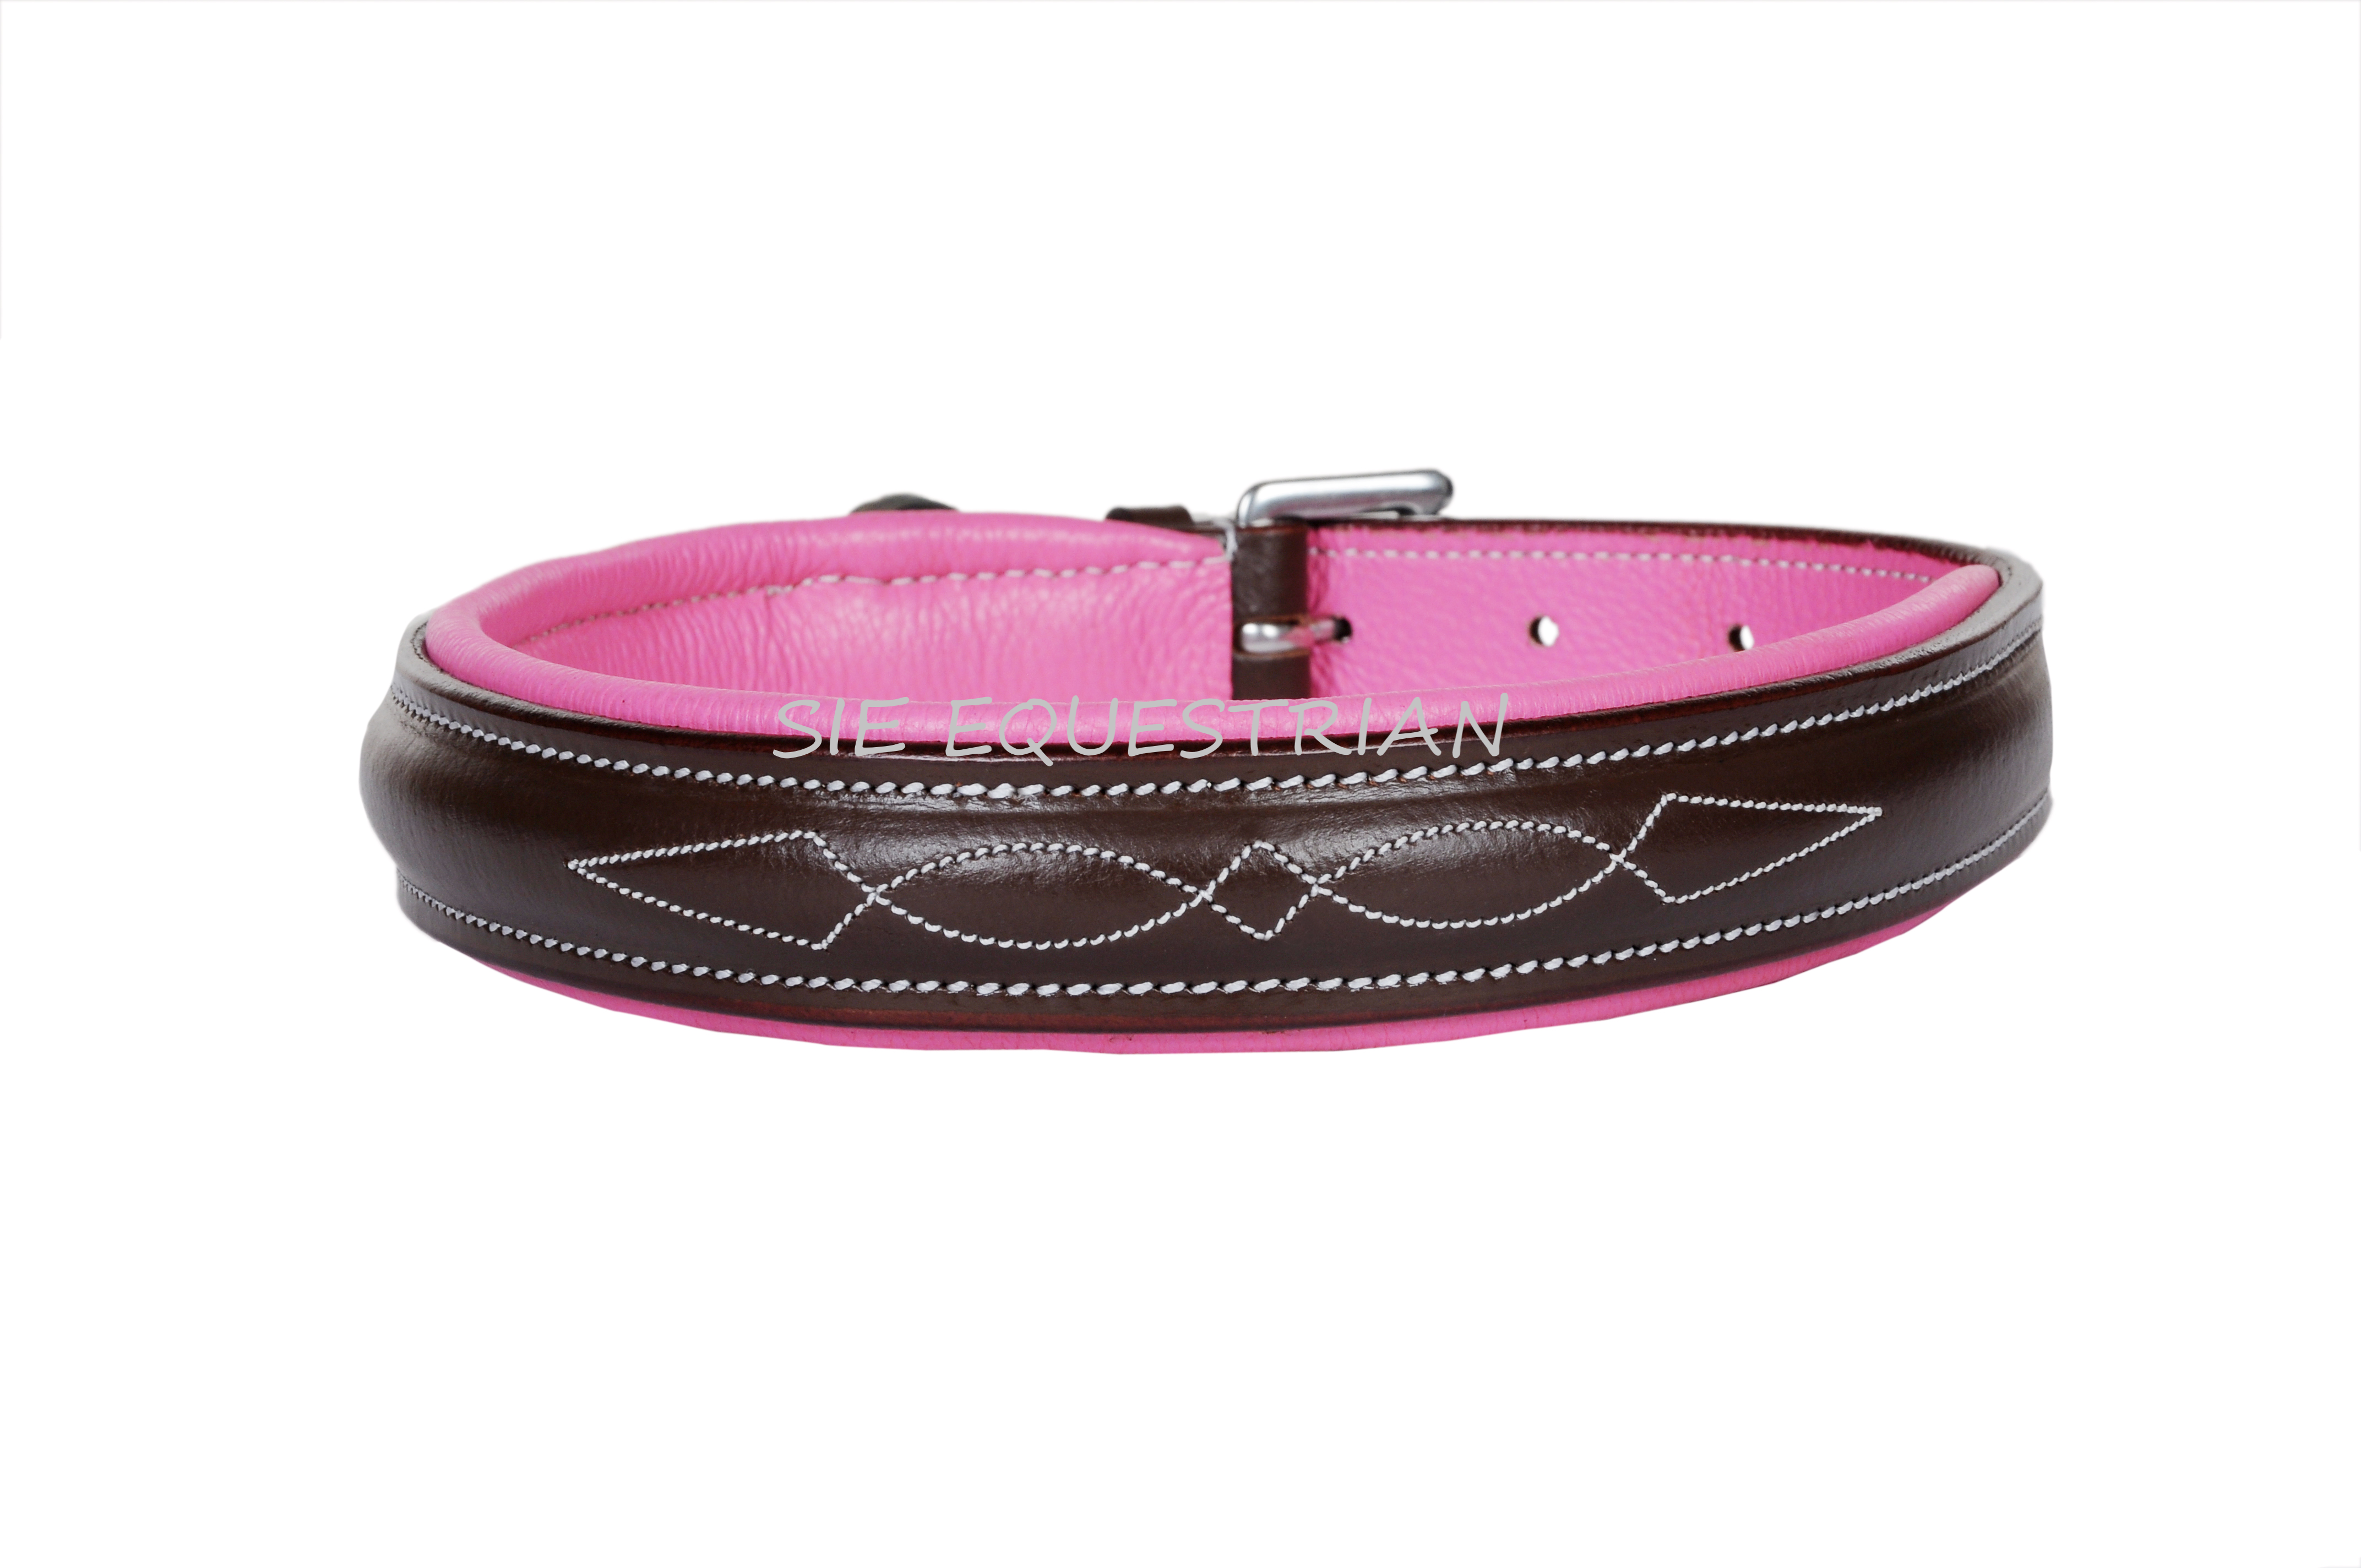 Fancy Stitched Dog Collars with Colored Padding